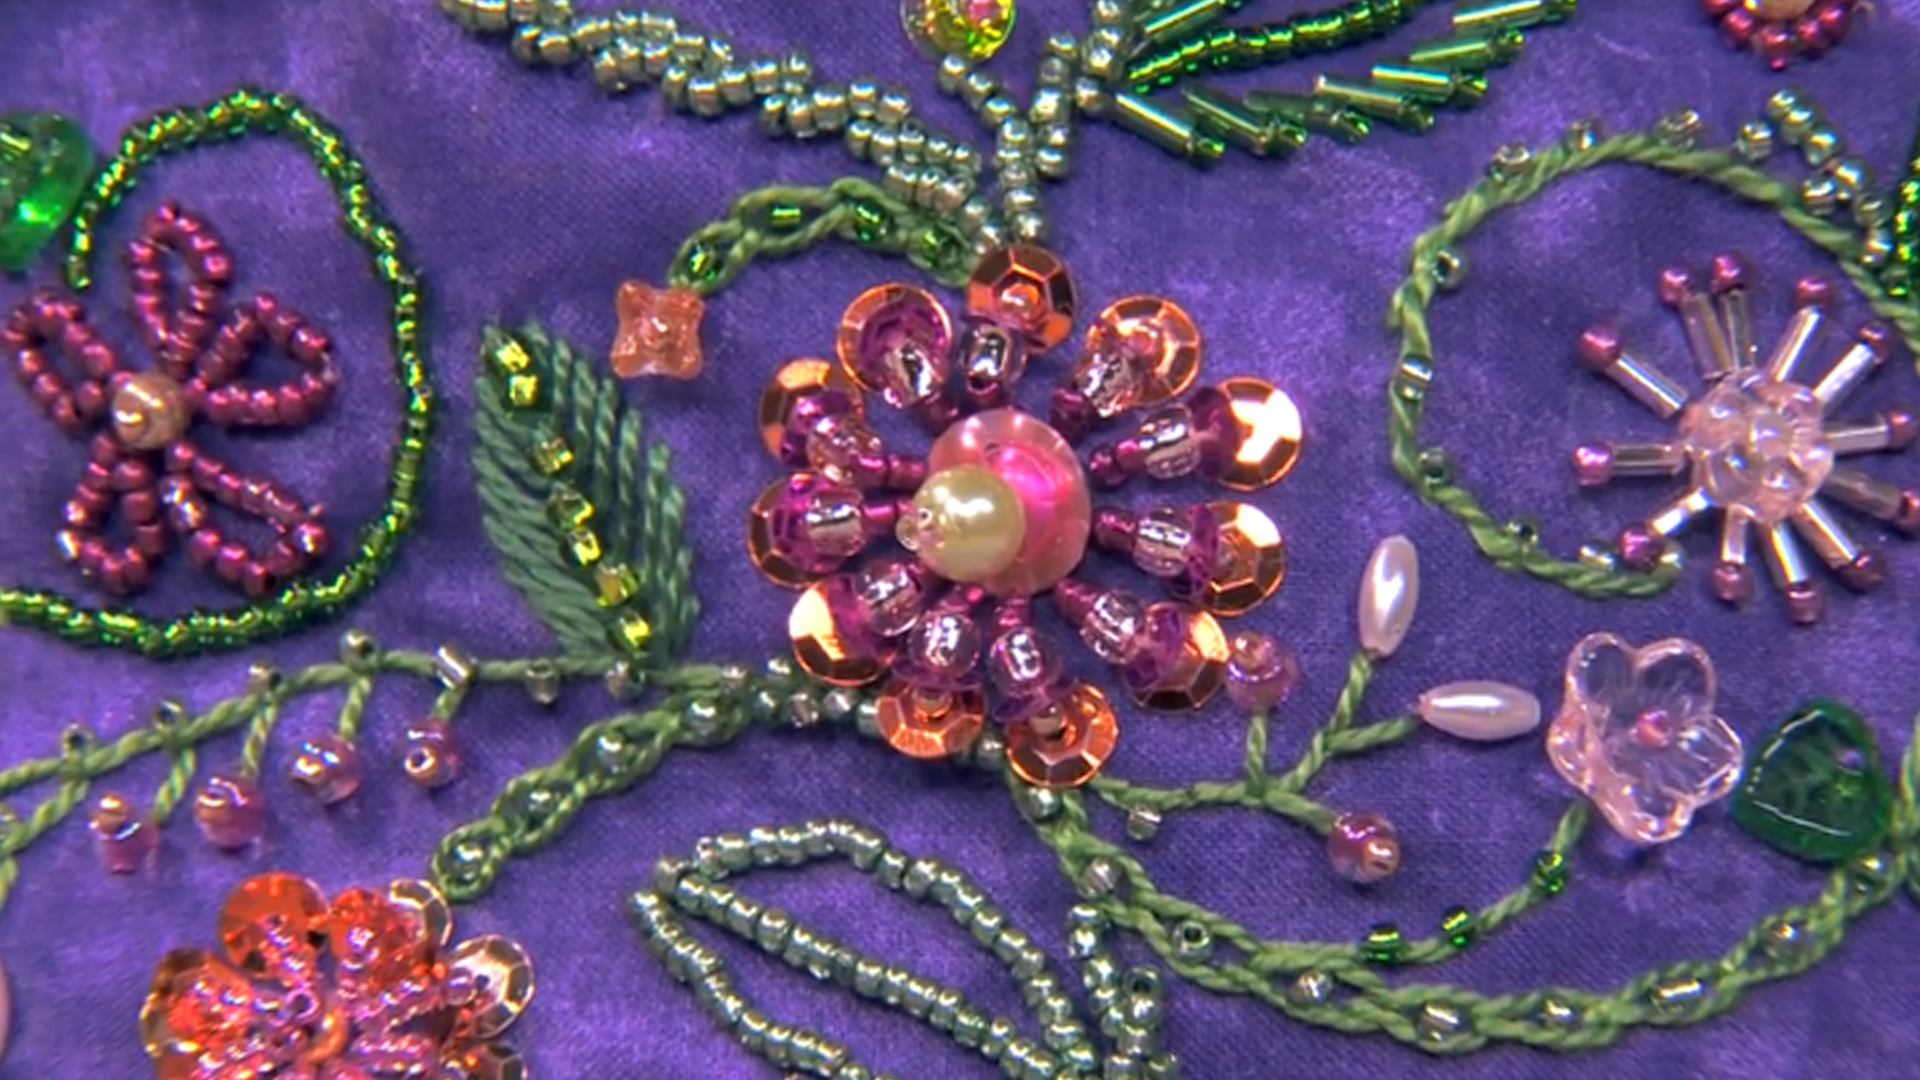 Adding sparkle and texture to your hand embroidery with beads